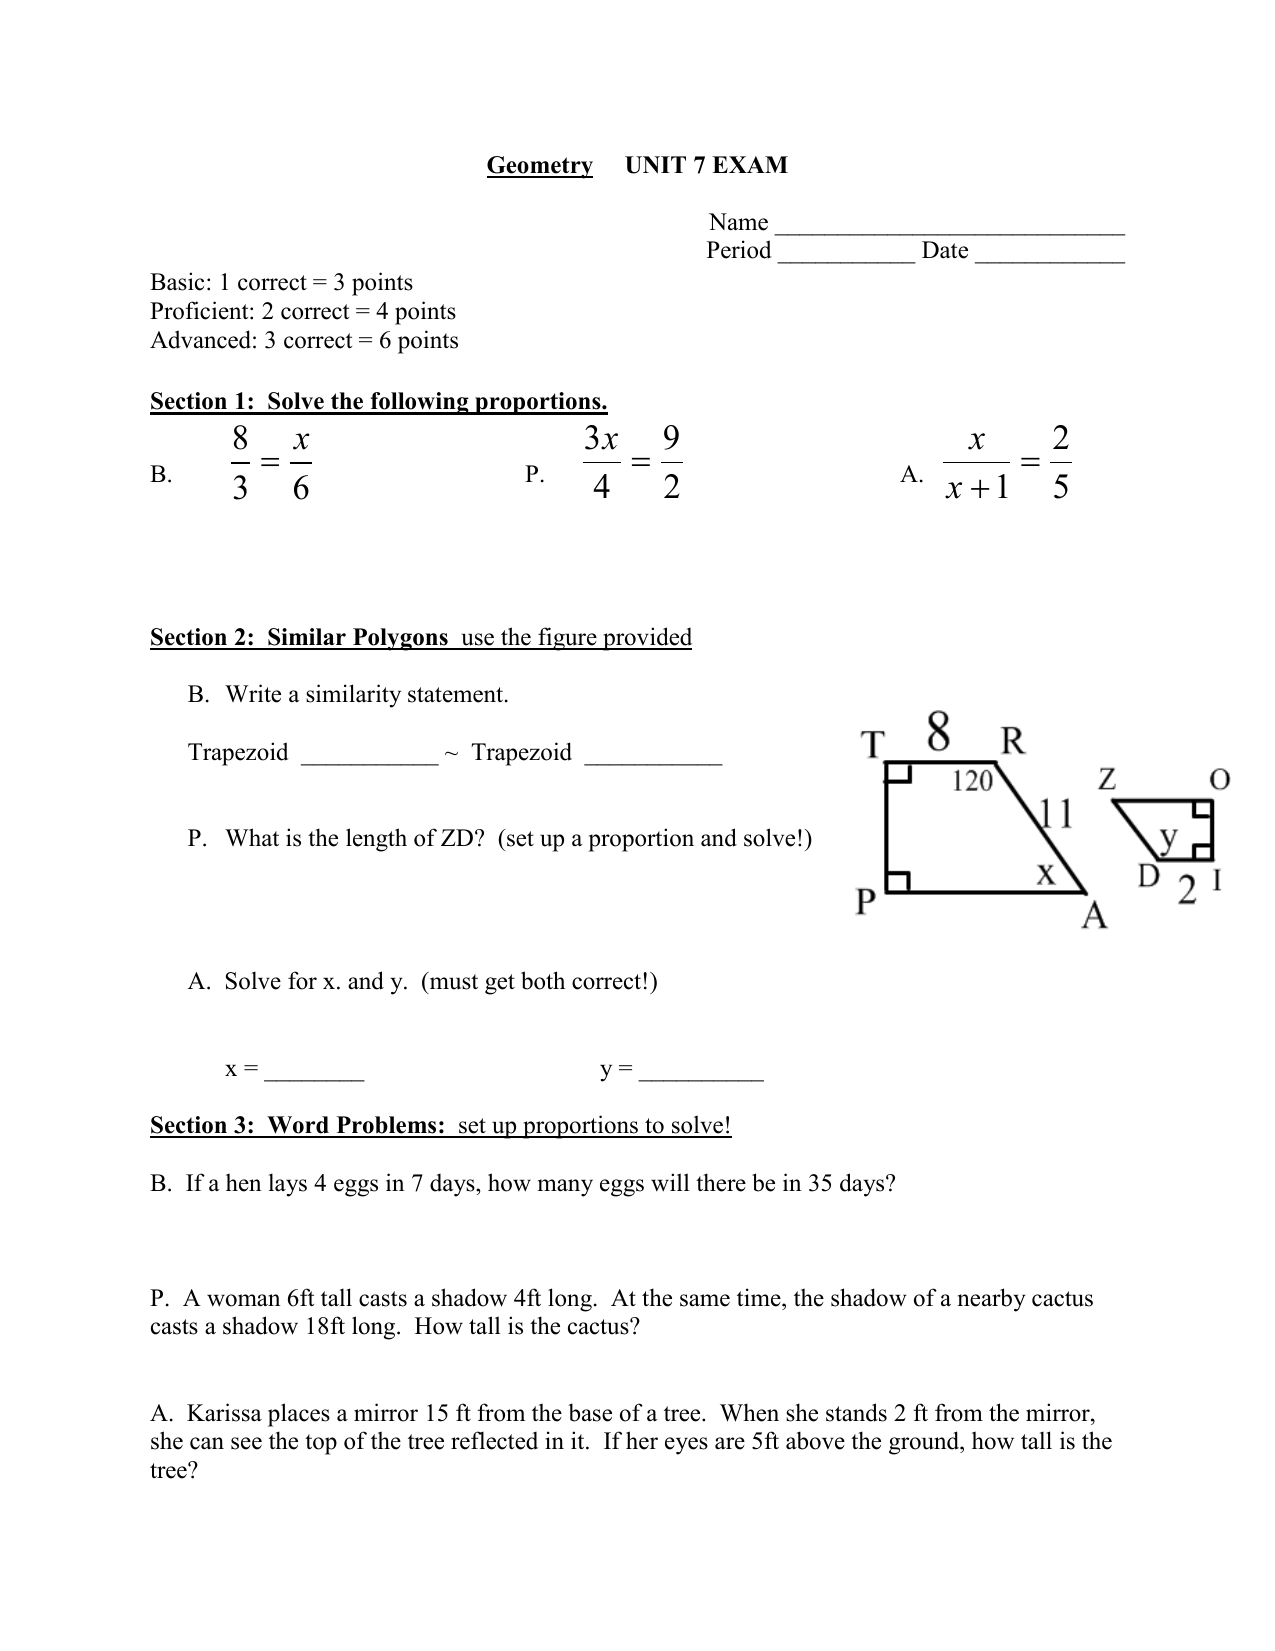 25+ Chapter 7 Geometry Test Answers